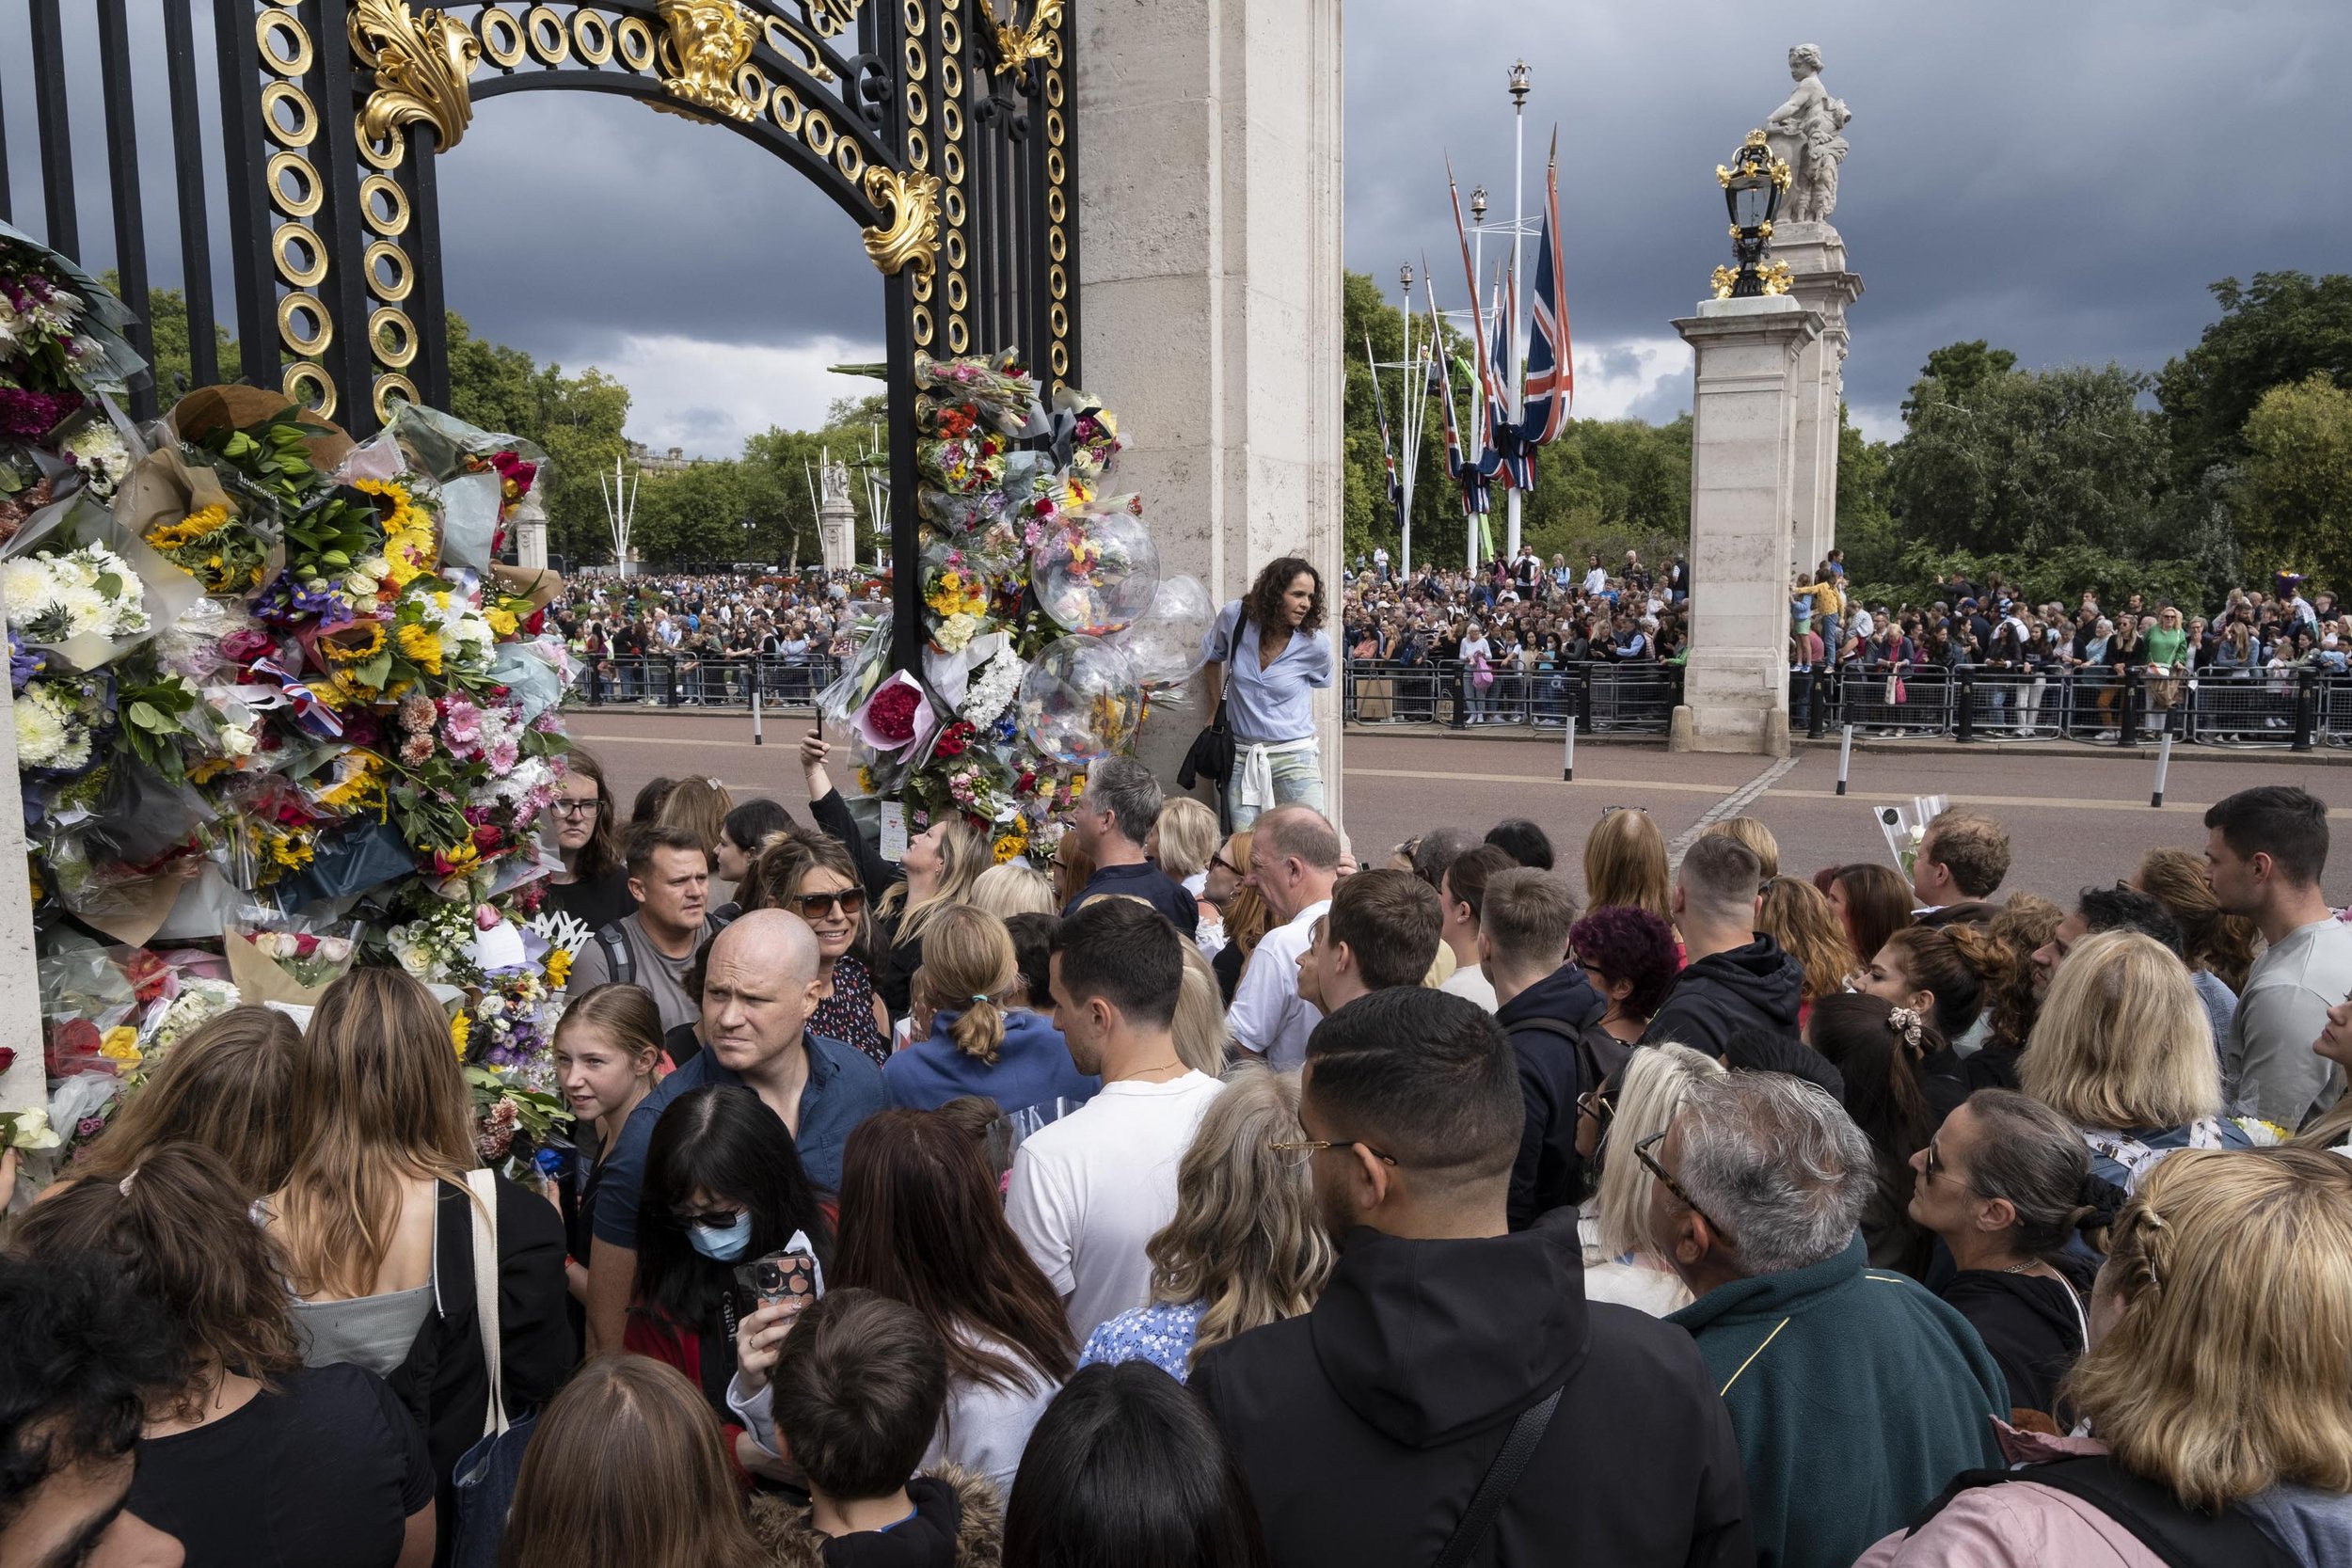  Crowds of people begin to leave flowers in the gates surrounding Buckingham Palace. 